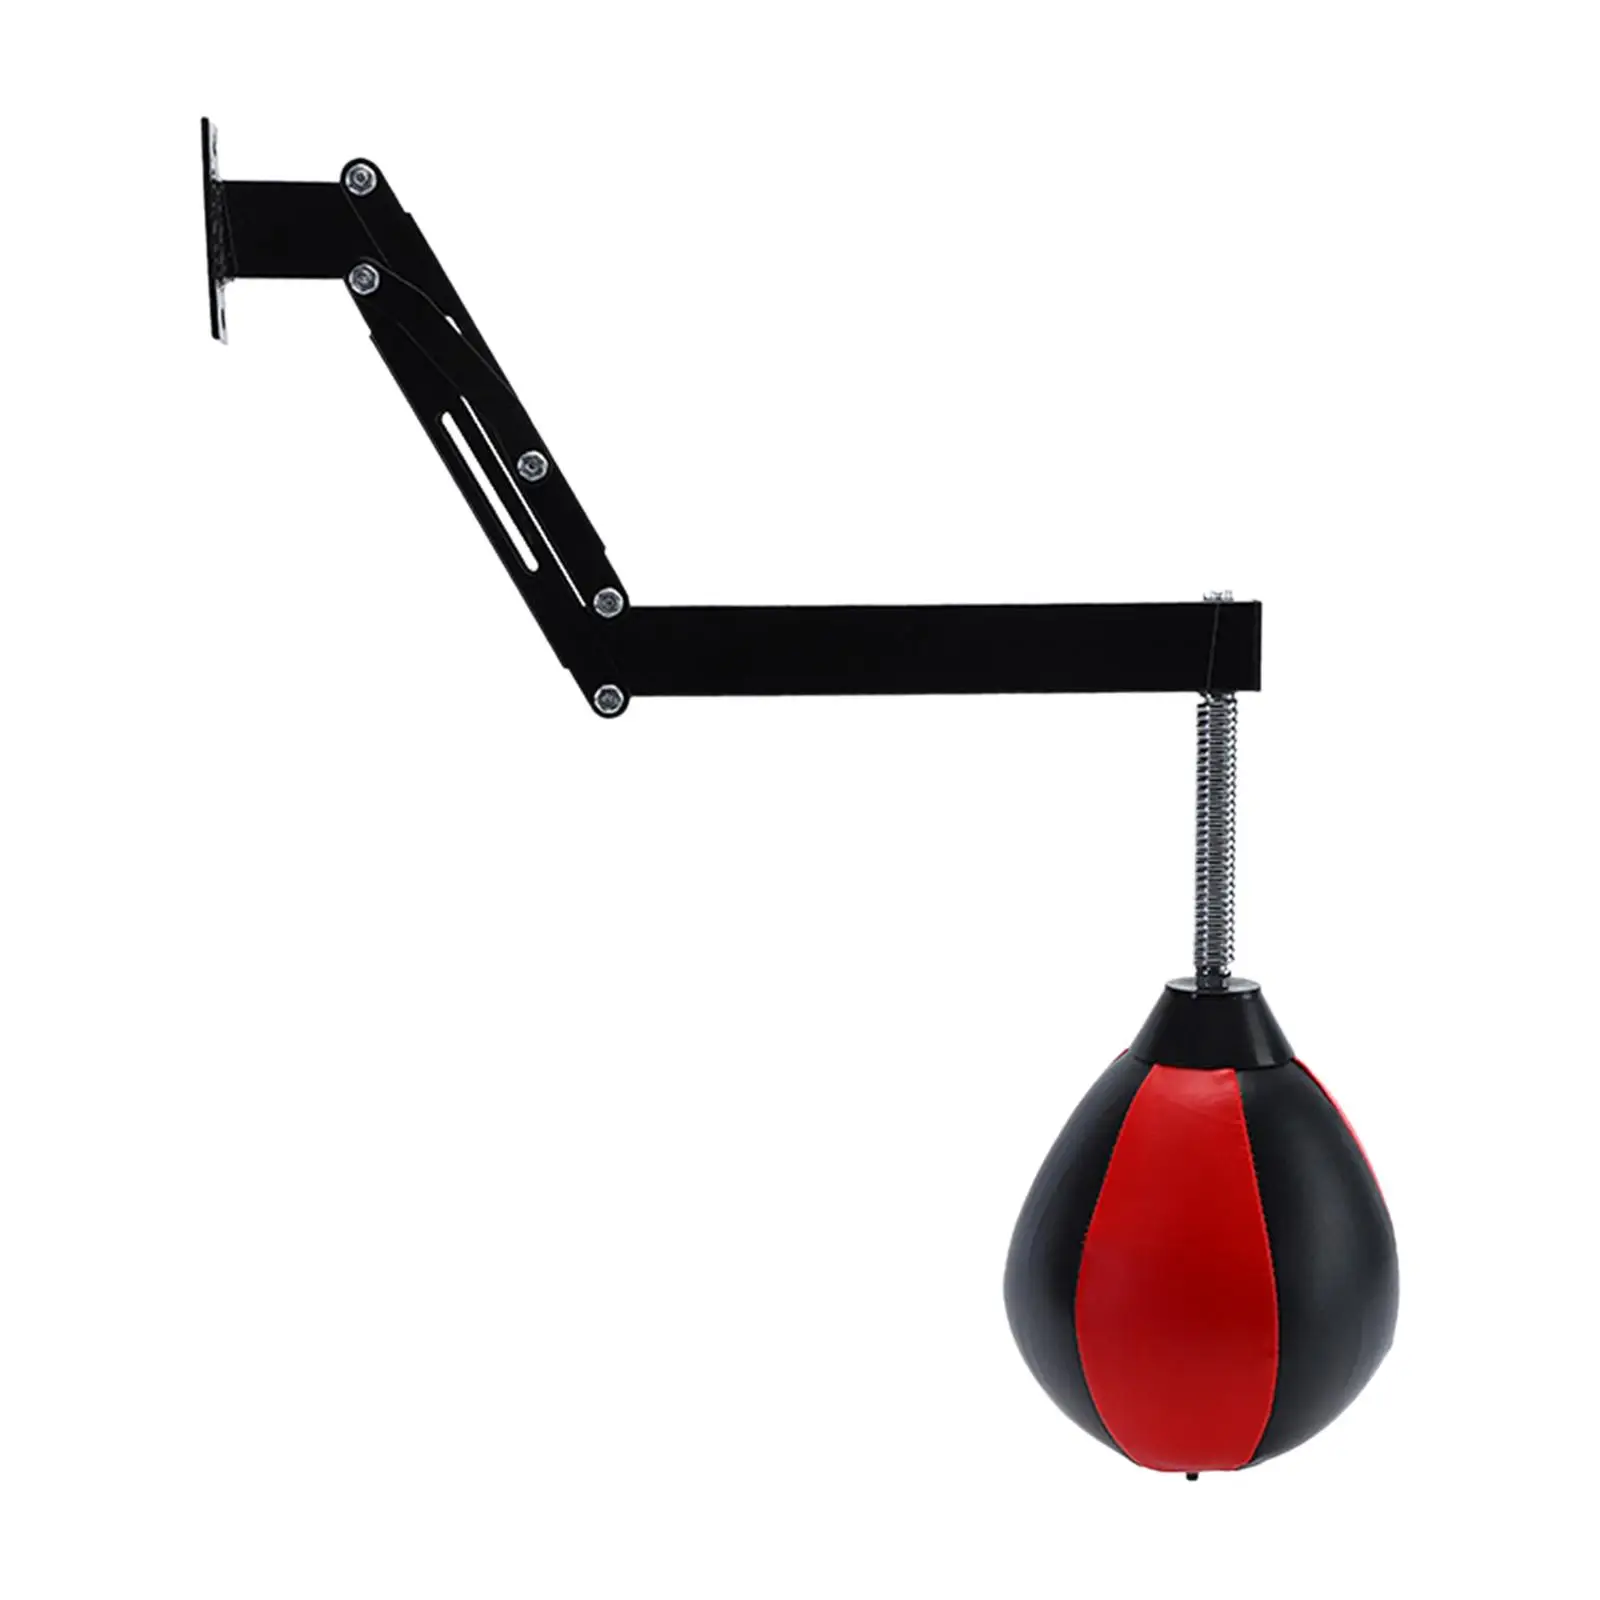 Speed Bag Height Adjustable Heavy Duty PU Leather Wall Mount Boxing Punching Bag for Sports Training Sanda Sparring Gym